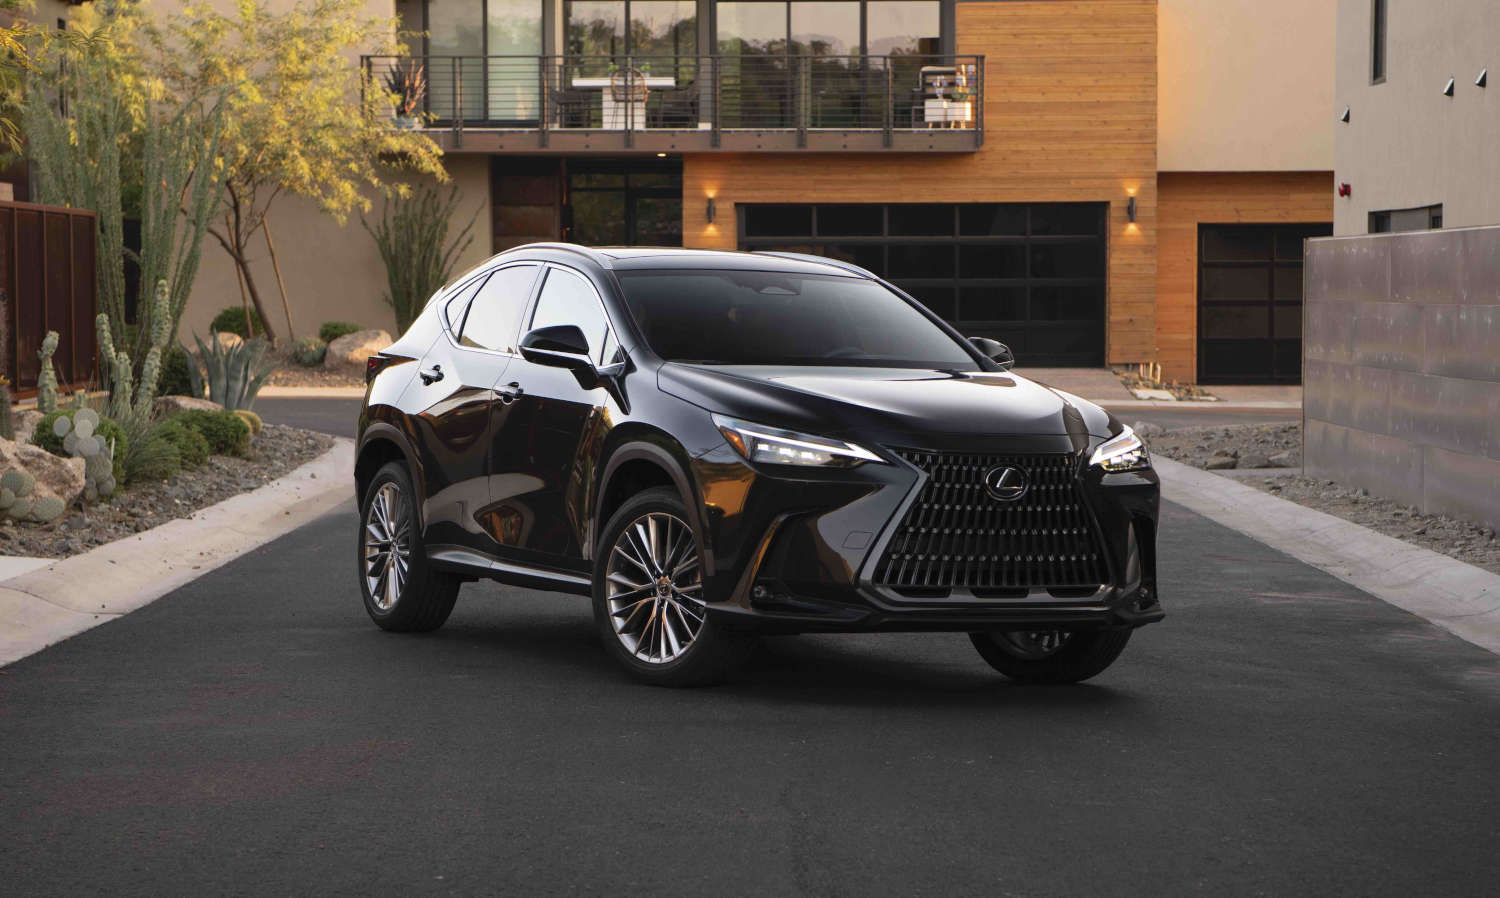 The highest rated SUVs under $50,000 include this black Lexus NX